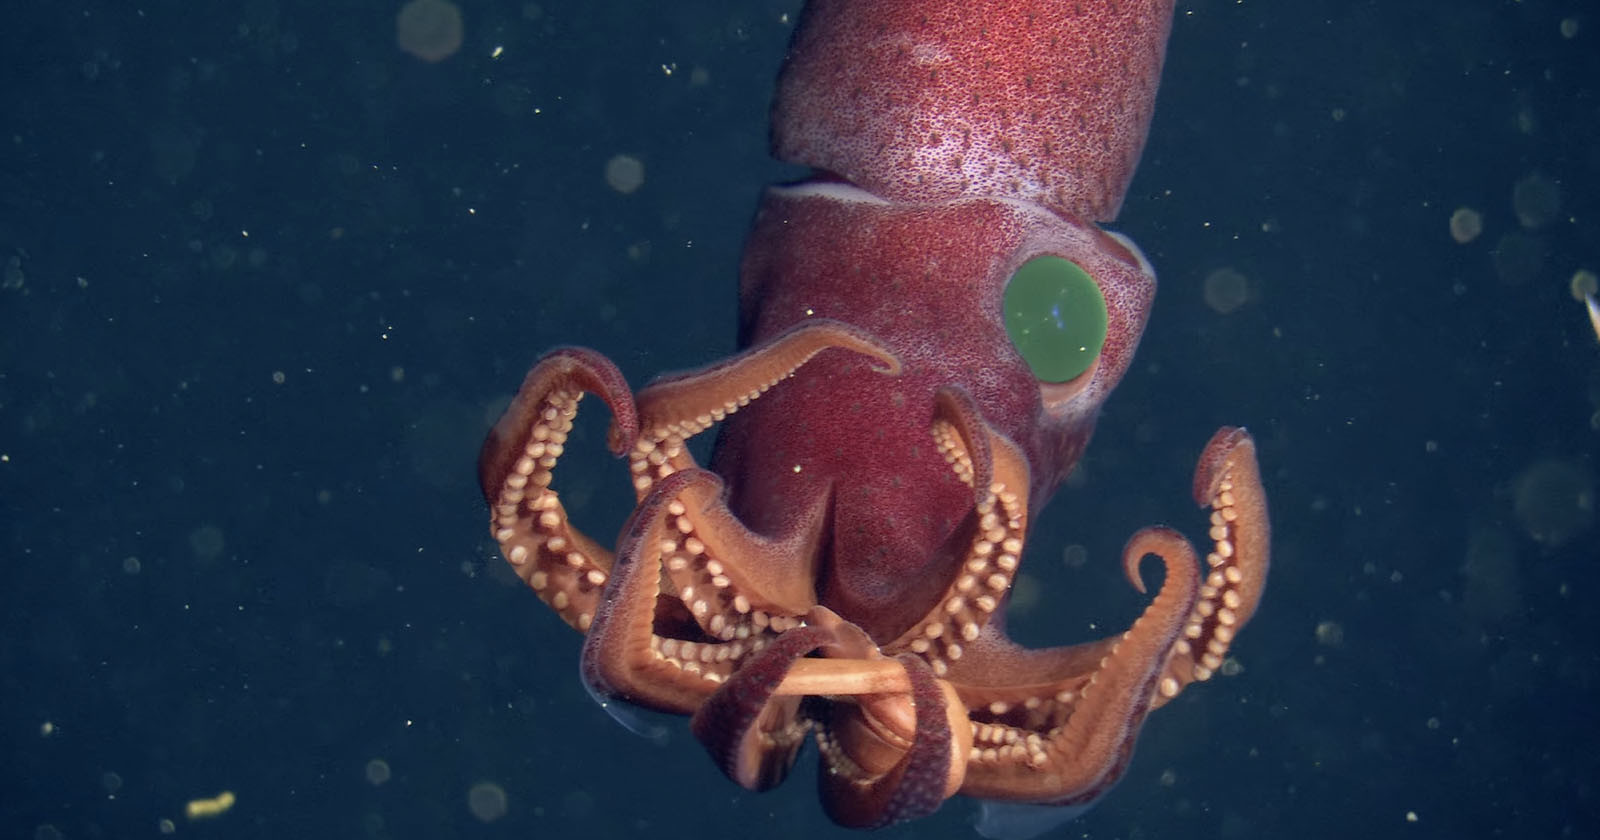 Glorious 4K Footage of a Strawberry Squid From 2,378ft Under the Sea